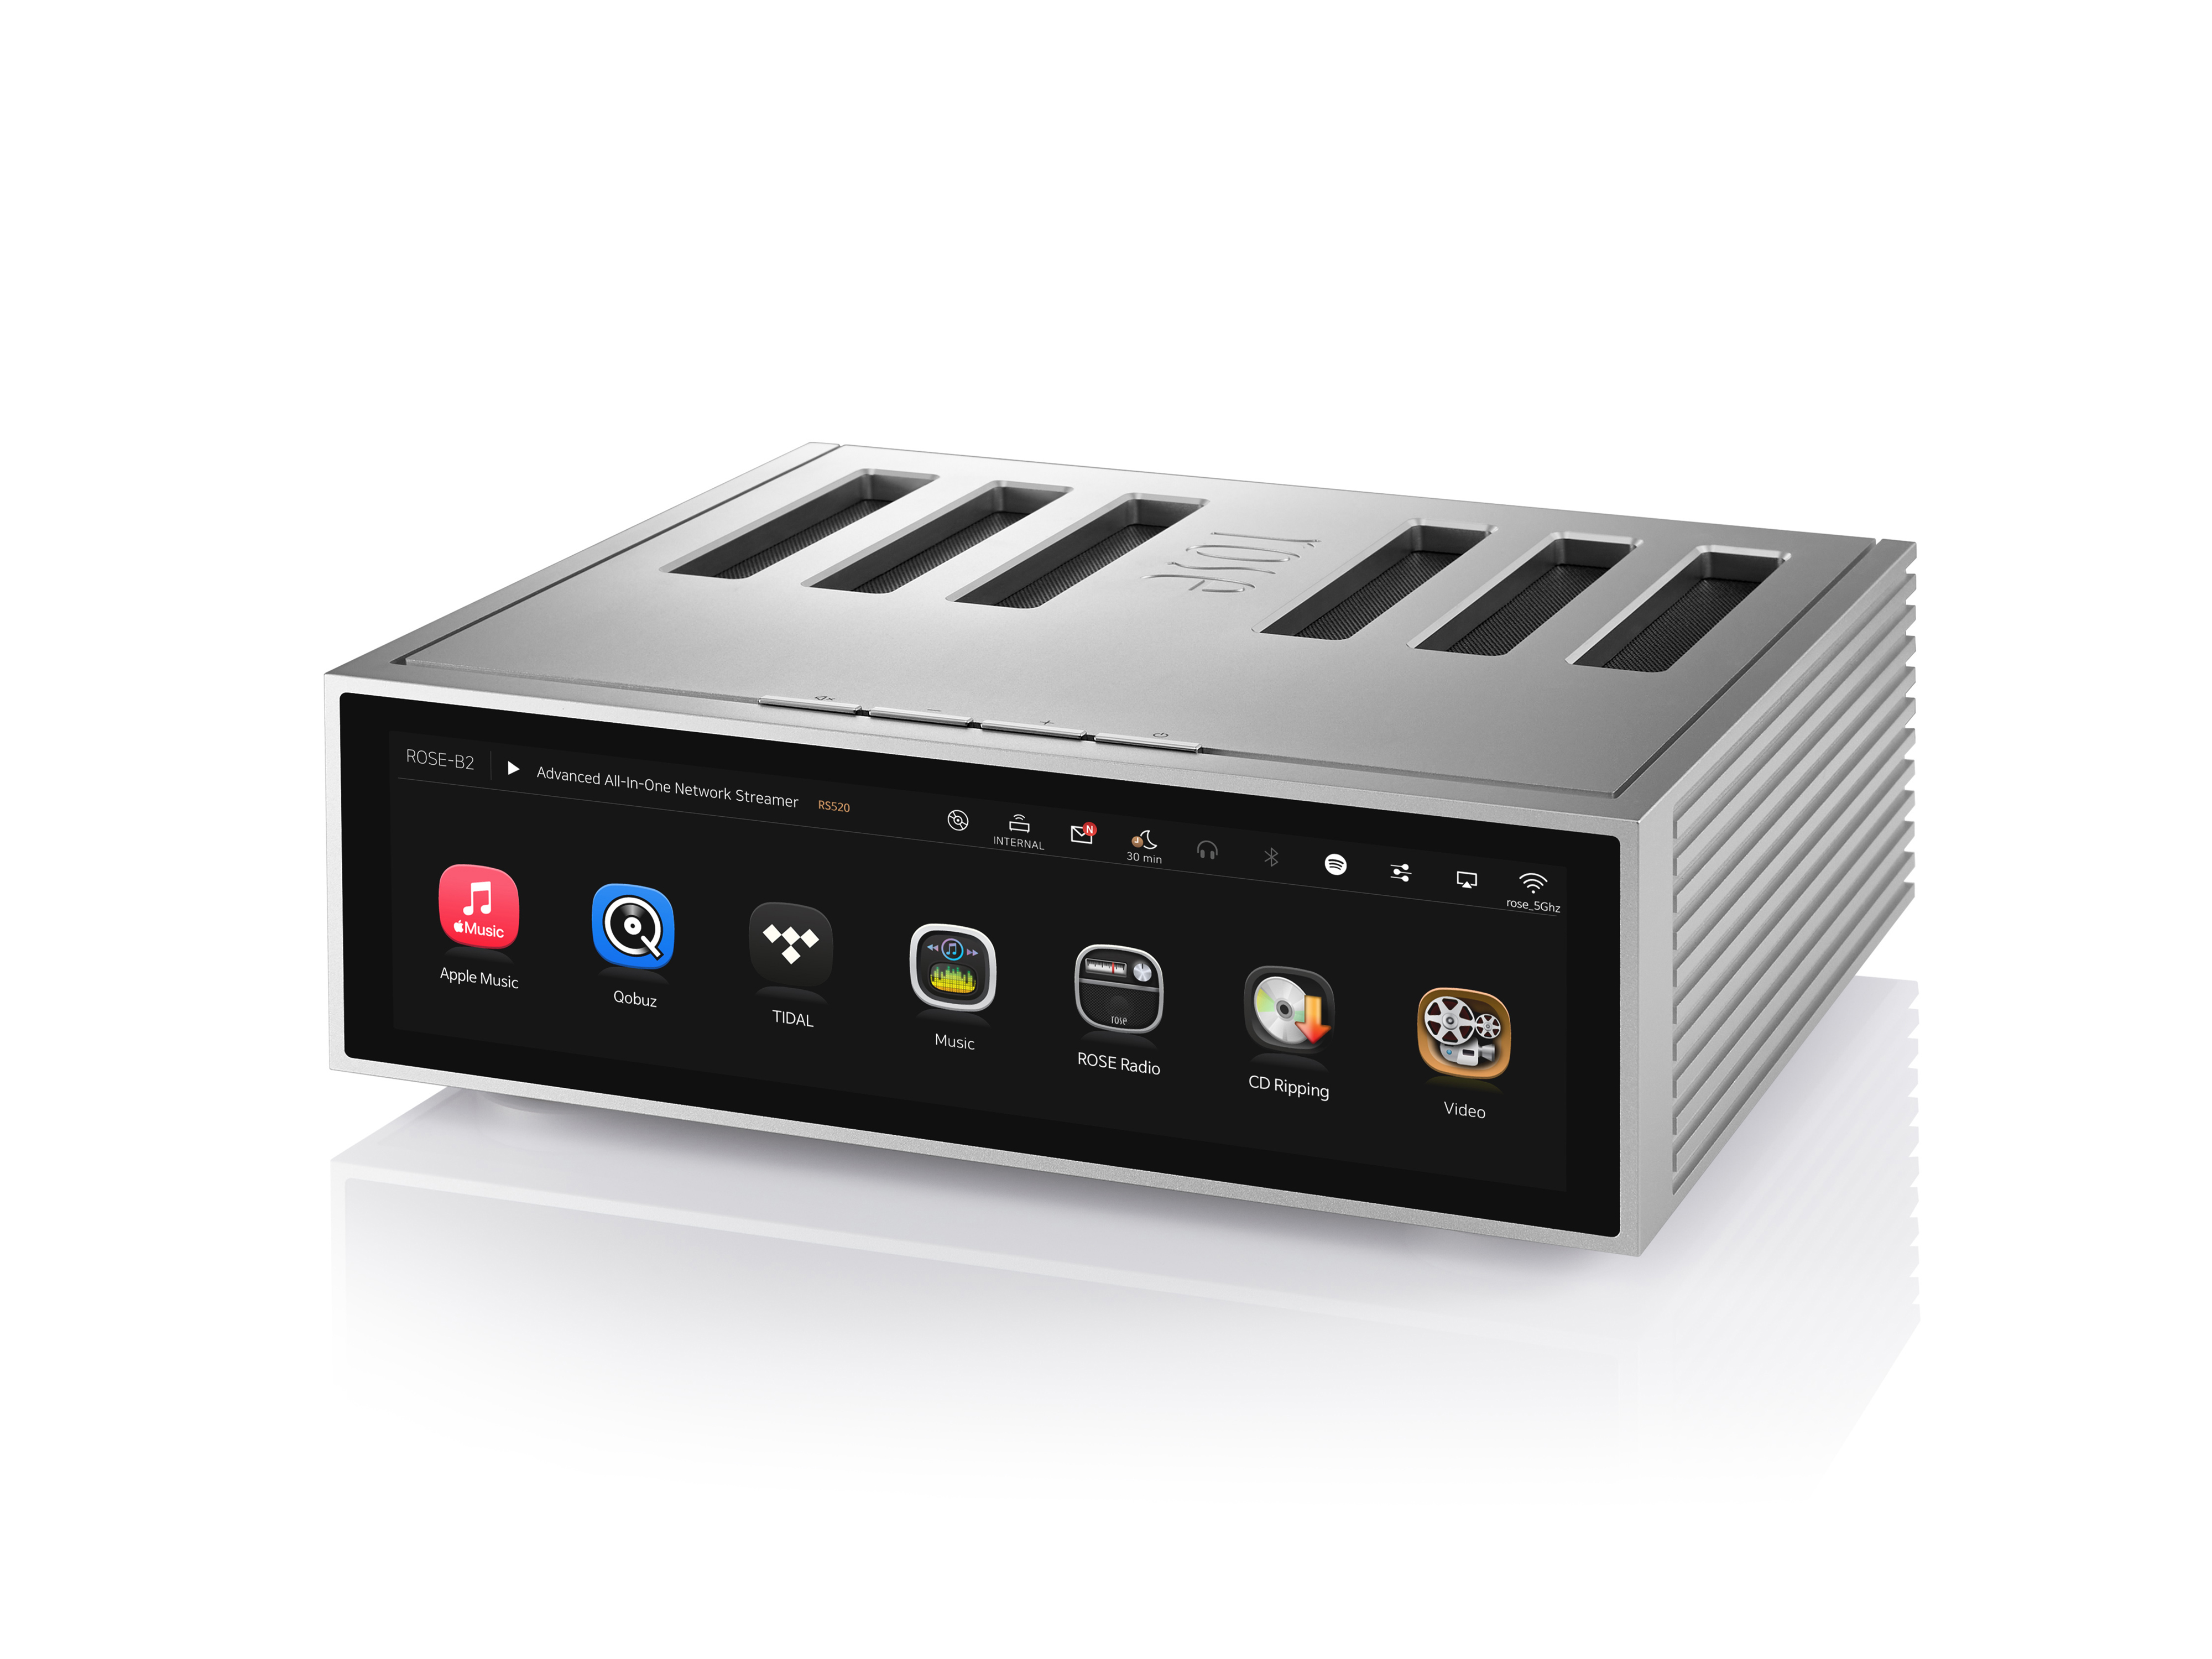 RS520 - Advanced All-In-One Network Streamer